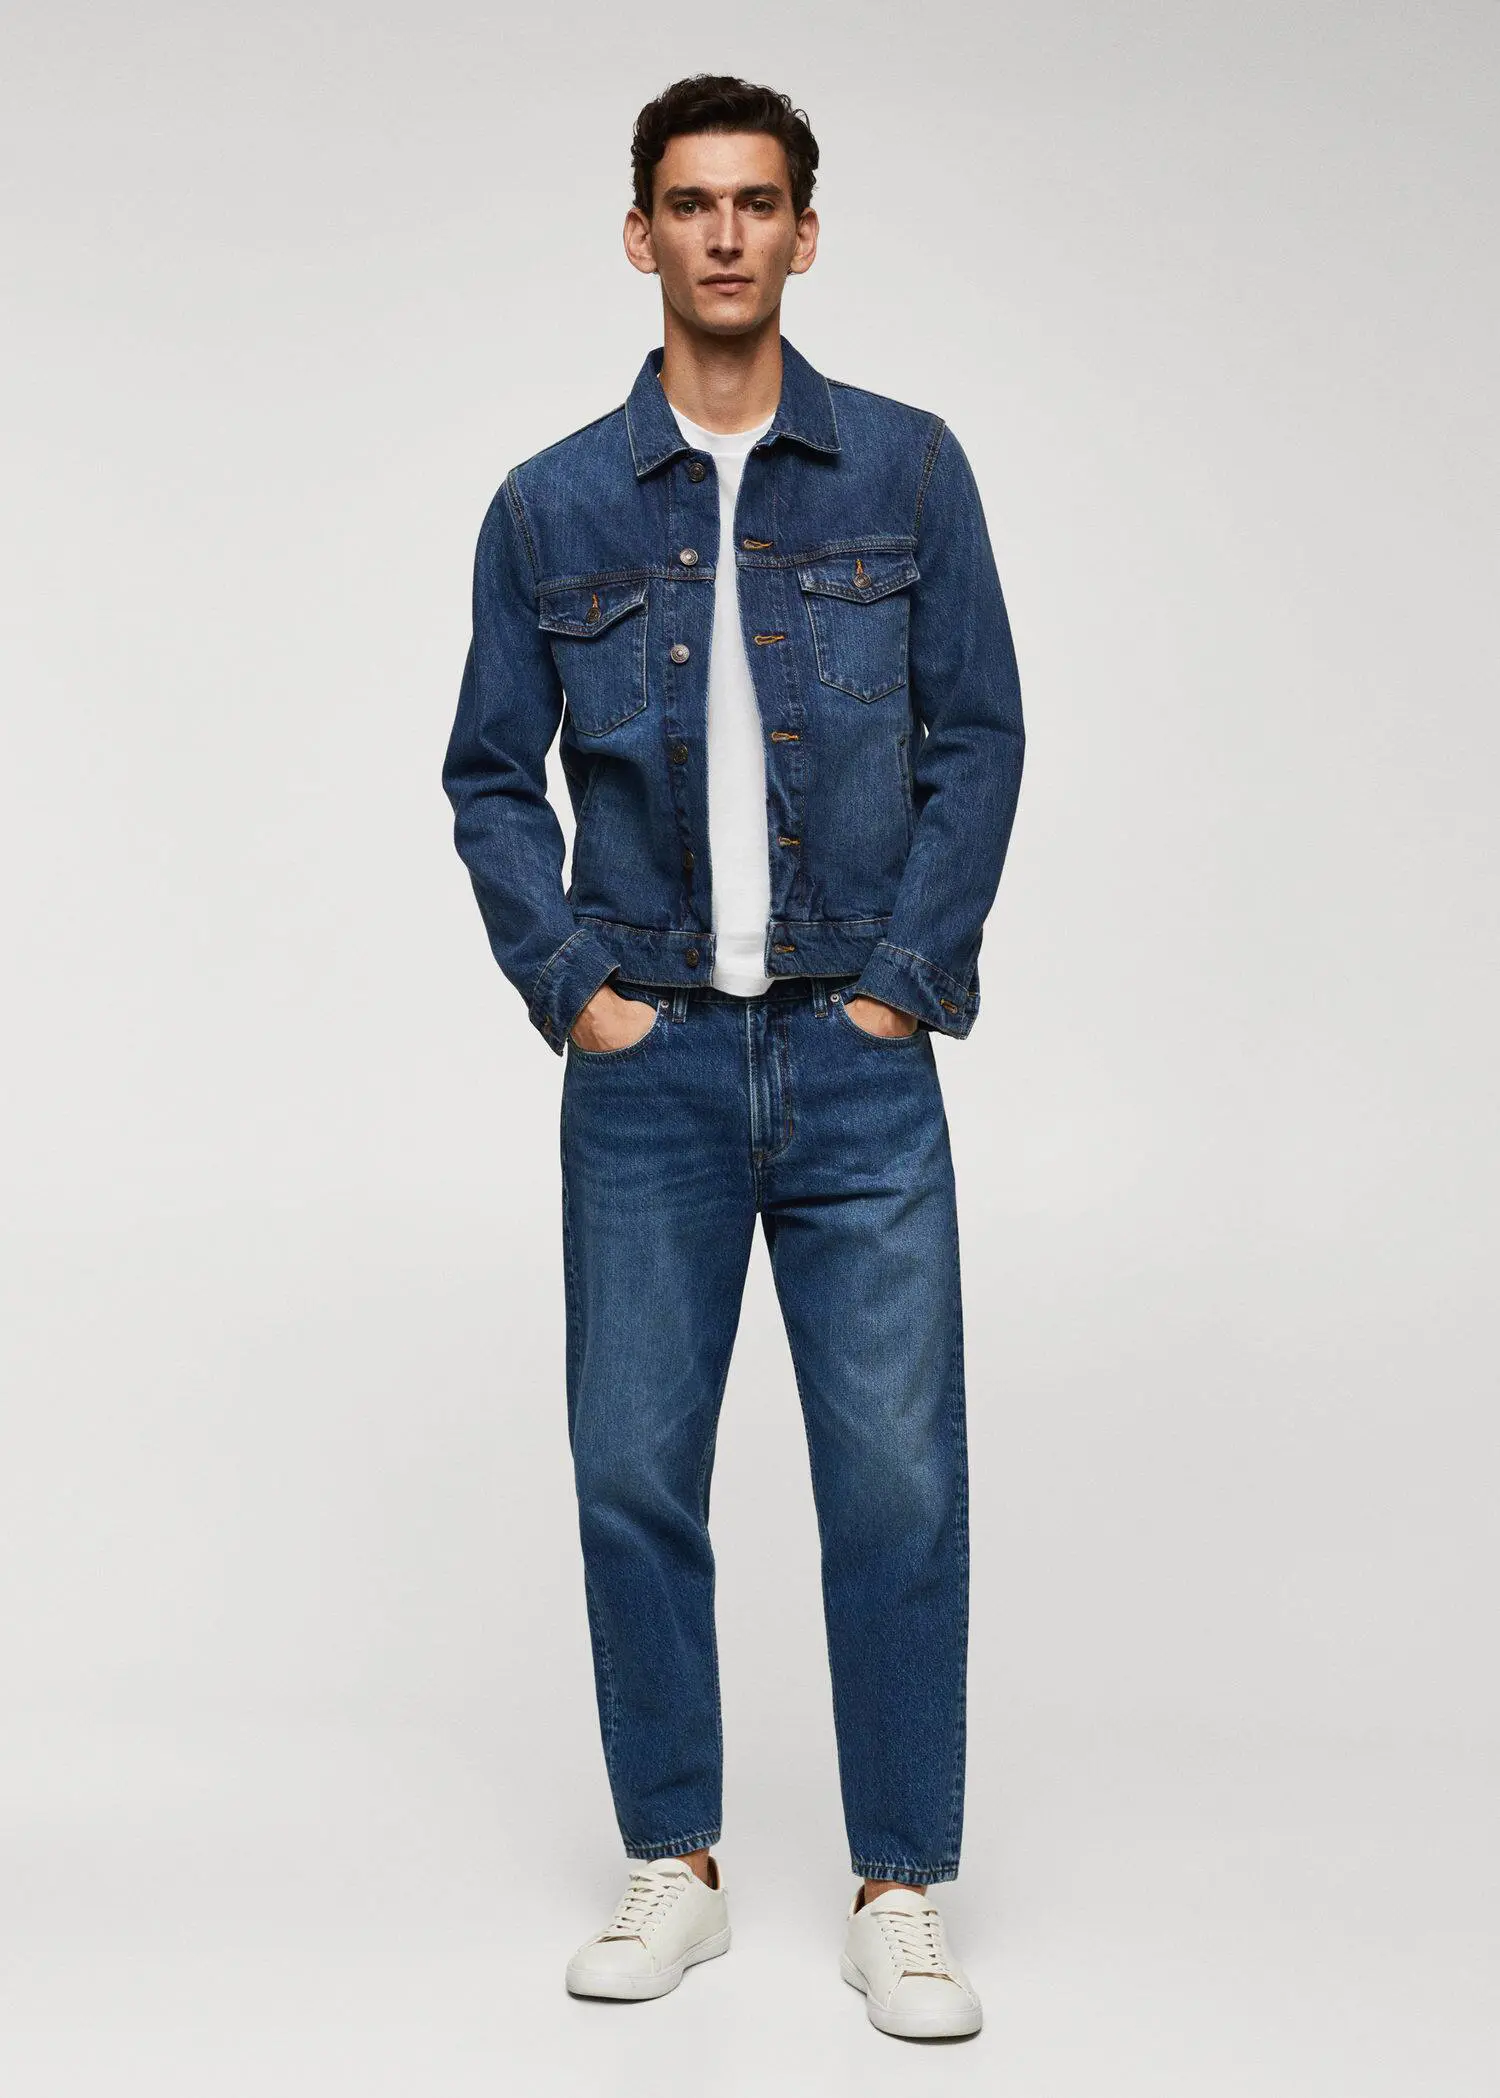 Mango Tapered Fit-Jeans mit dunkler Waschung. 3